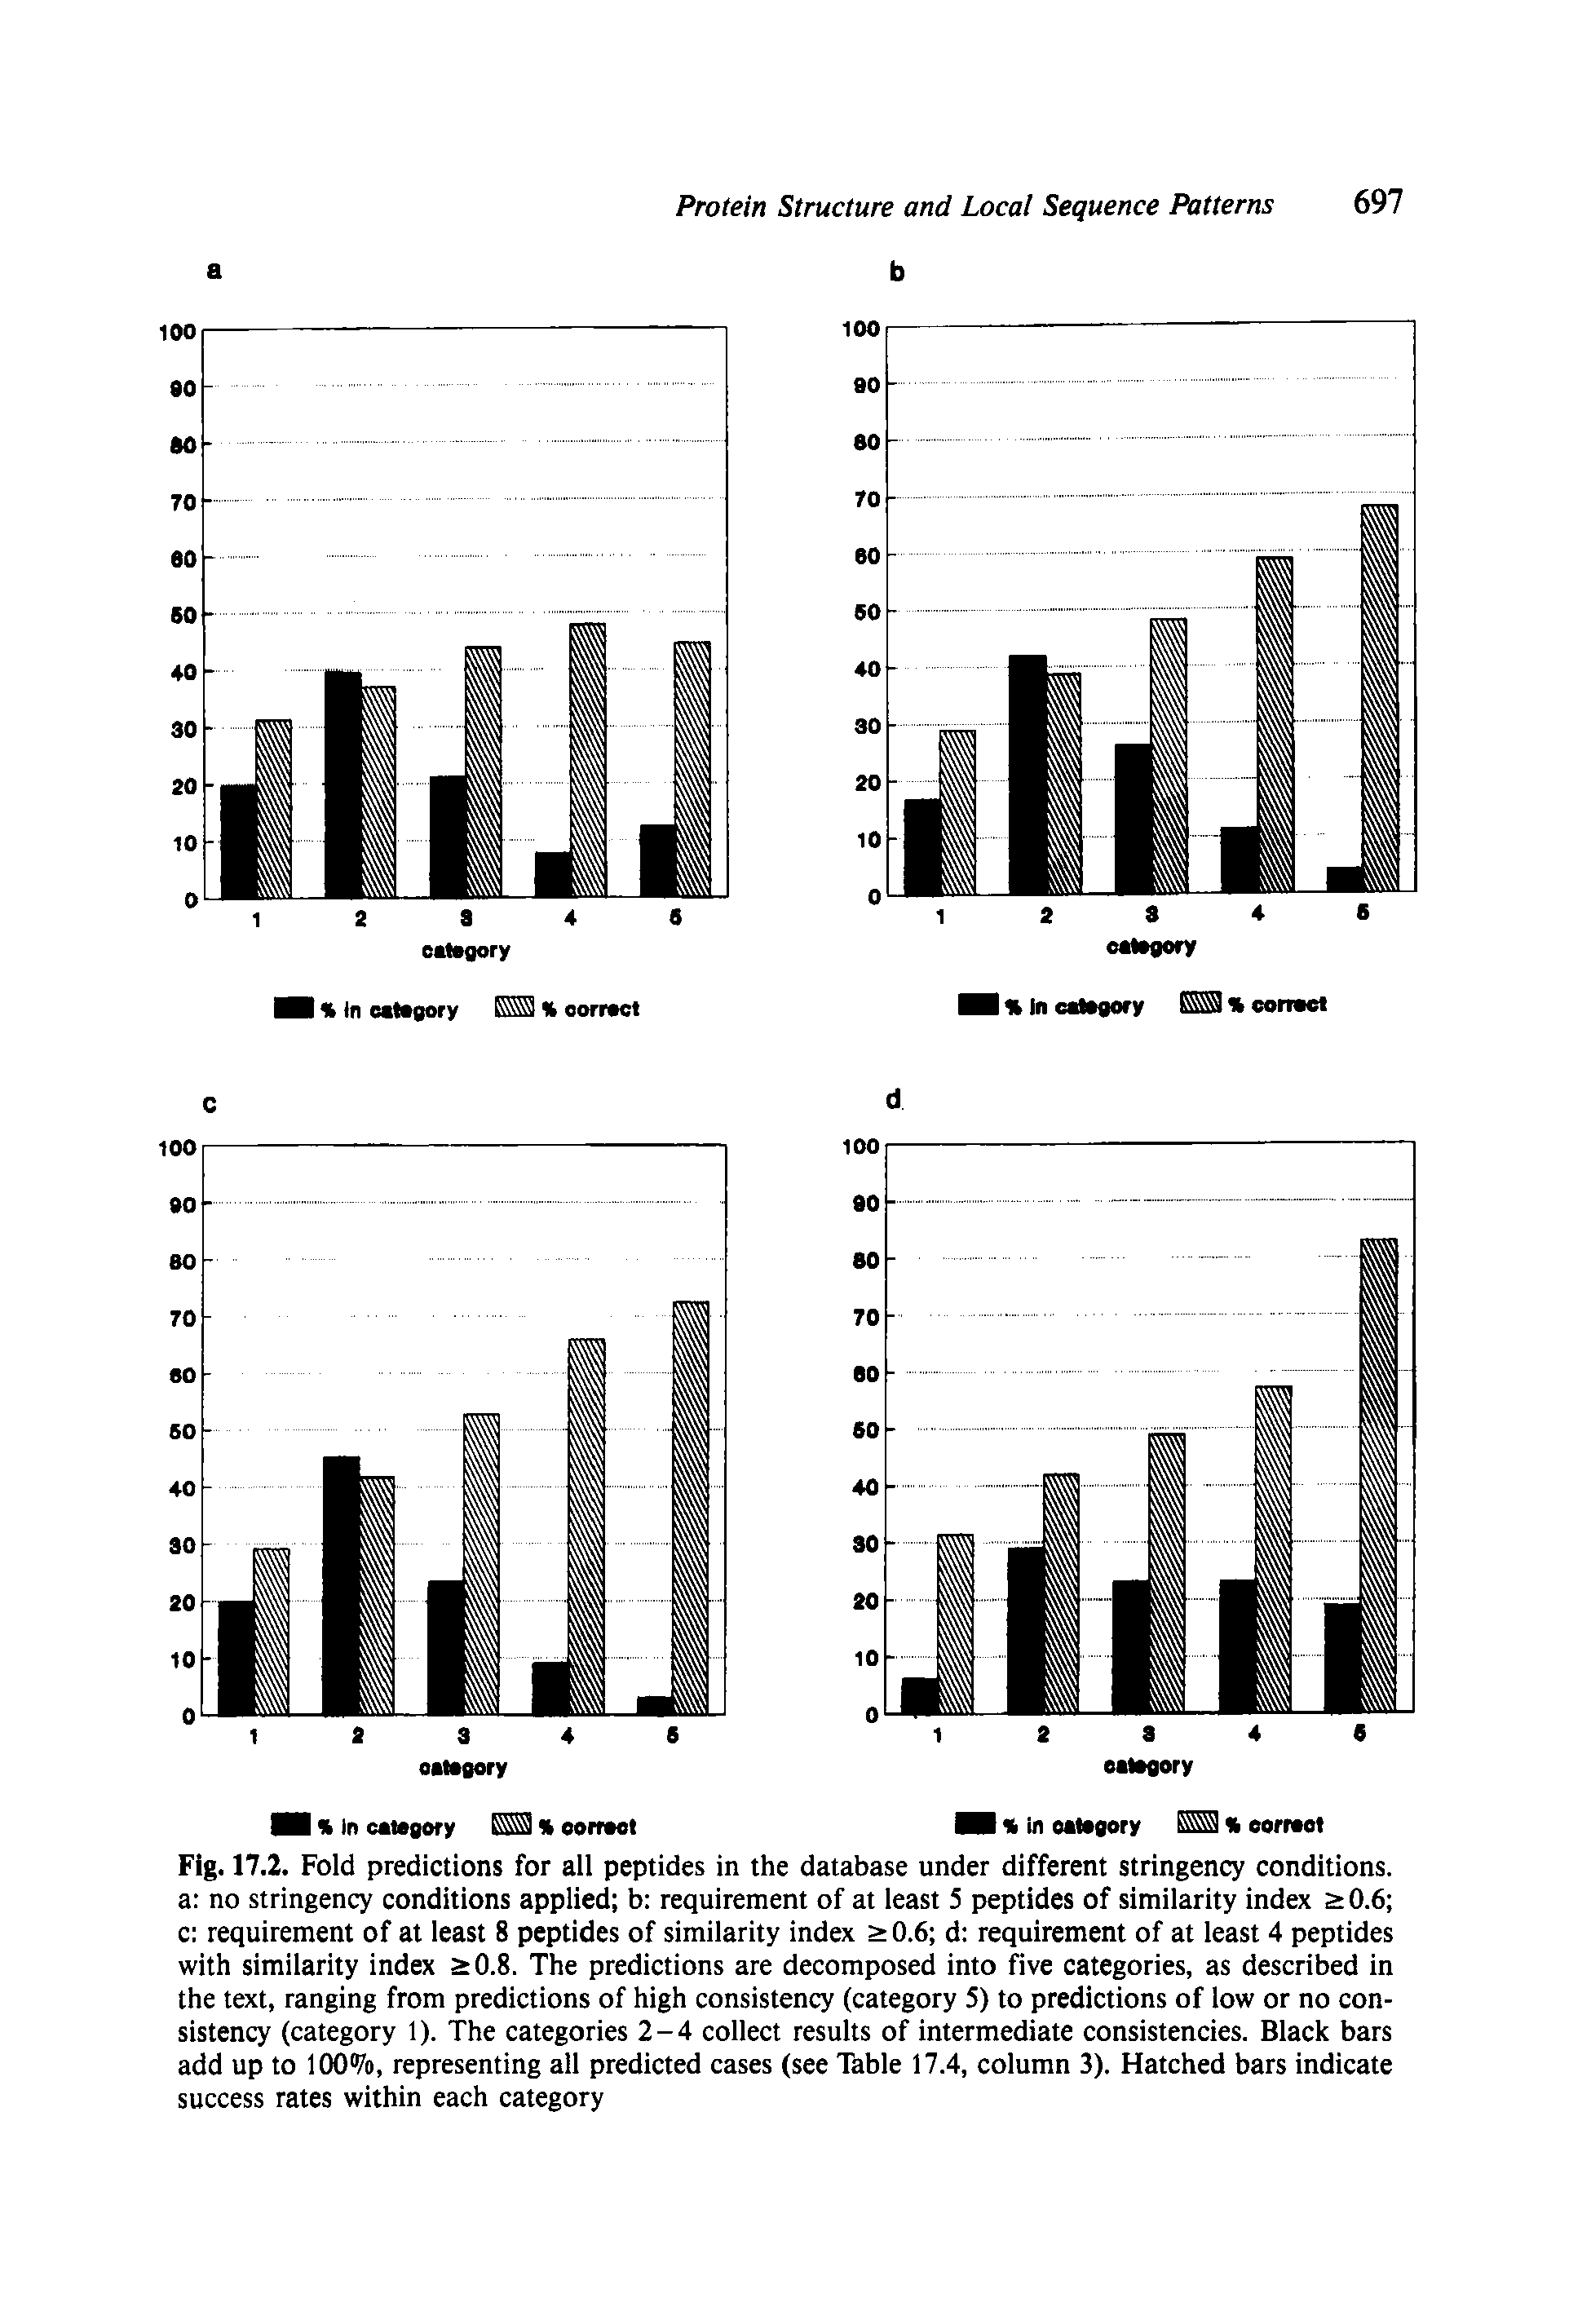 Fig. 17.2. Fold predictions for all peptides in the database under different stringency conditions, a no stringency conditions applied b requirement of at least 5 peptides of similarity index a 0.6 c requirement of at ieast 8 peptides of similarity index > 0.6 d requirement of at least 4 peptides with similarity index a 0.8. The predictions are decomposed into five categories, as described in the text, ranging from predictions of high consistency (category 5) to predictions of low or no consistency (category 1). The categories 2-4 collect results of intermediate consistencies. Black bars add up to 100%, representing all predicted cases (see Table 17.4, column 3). Hatched bars indicate success rates within each category...